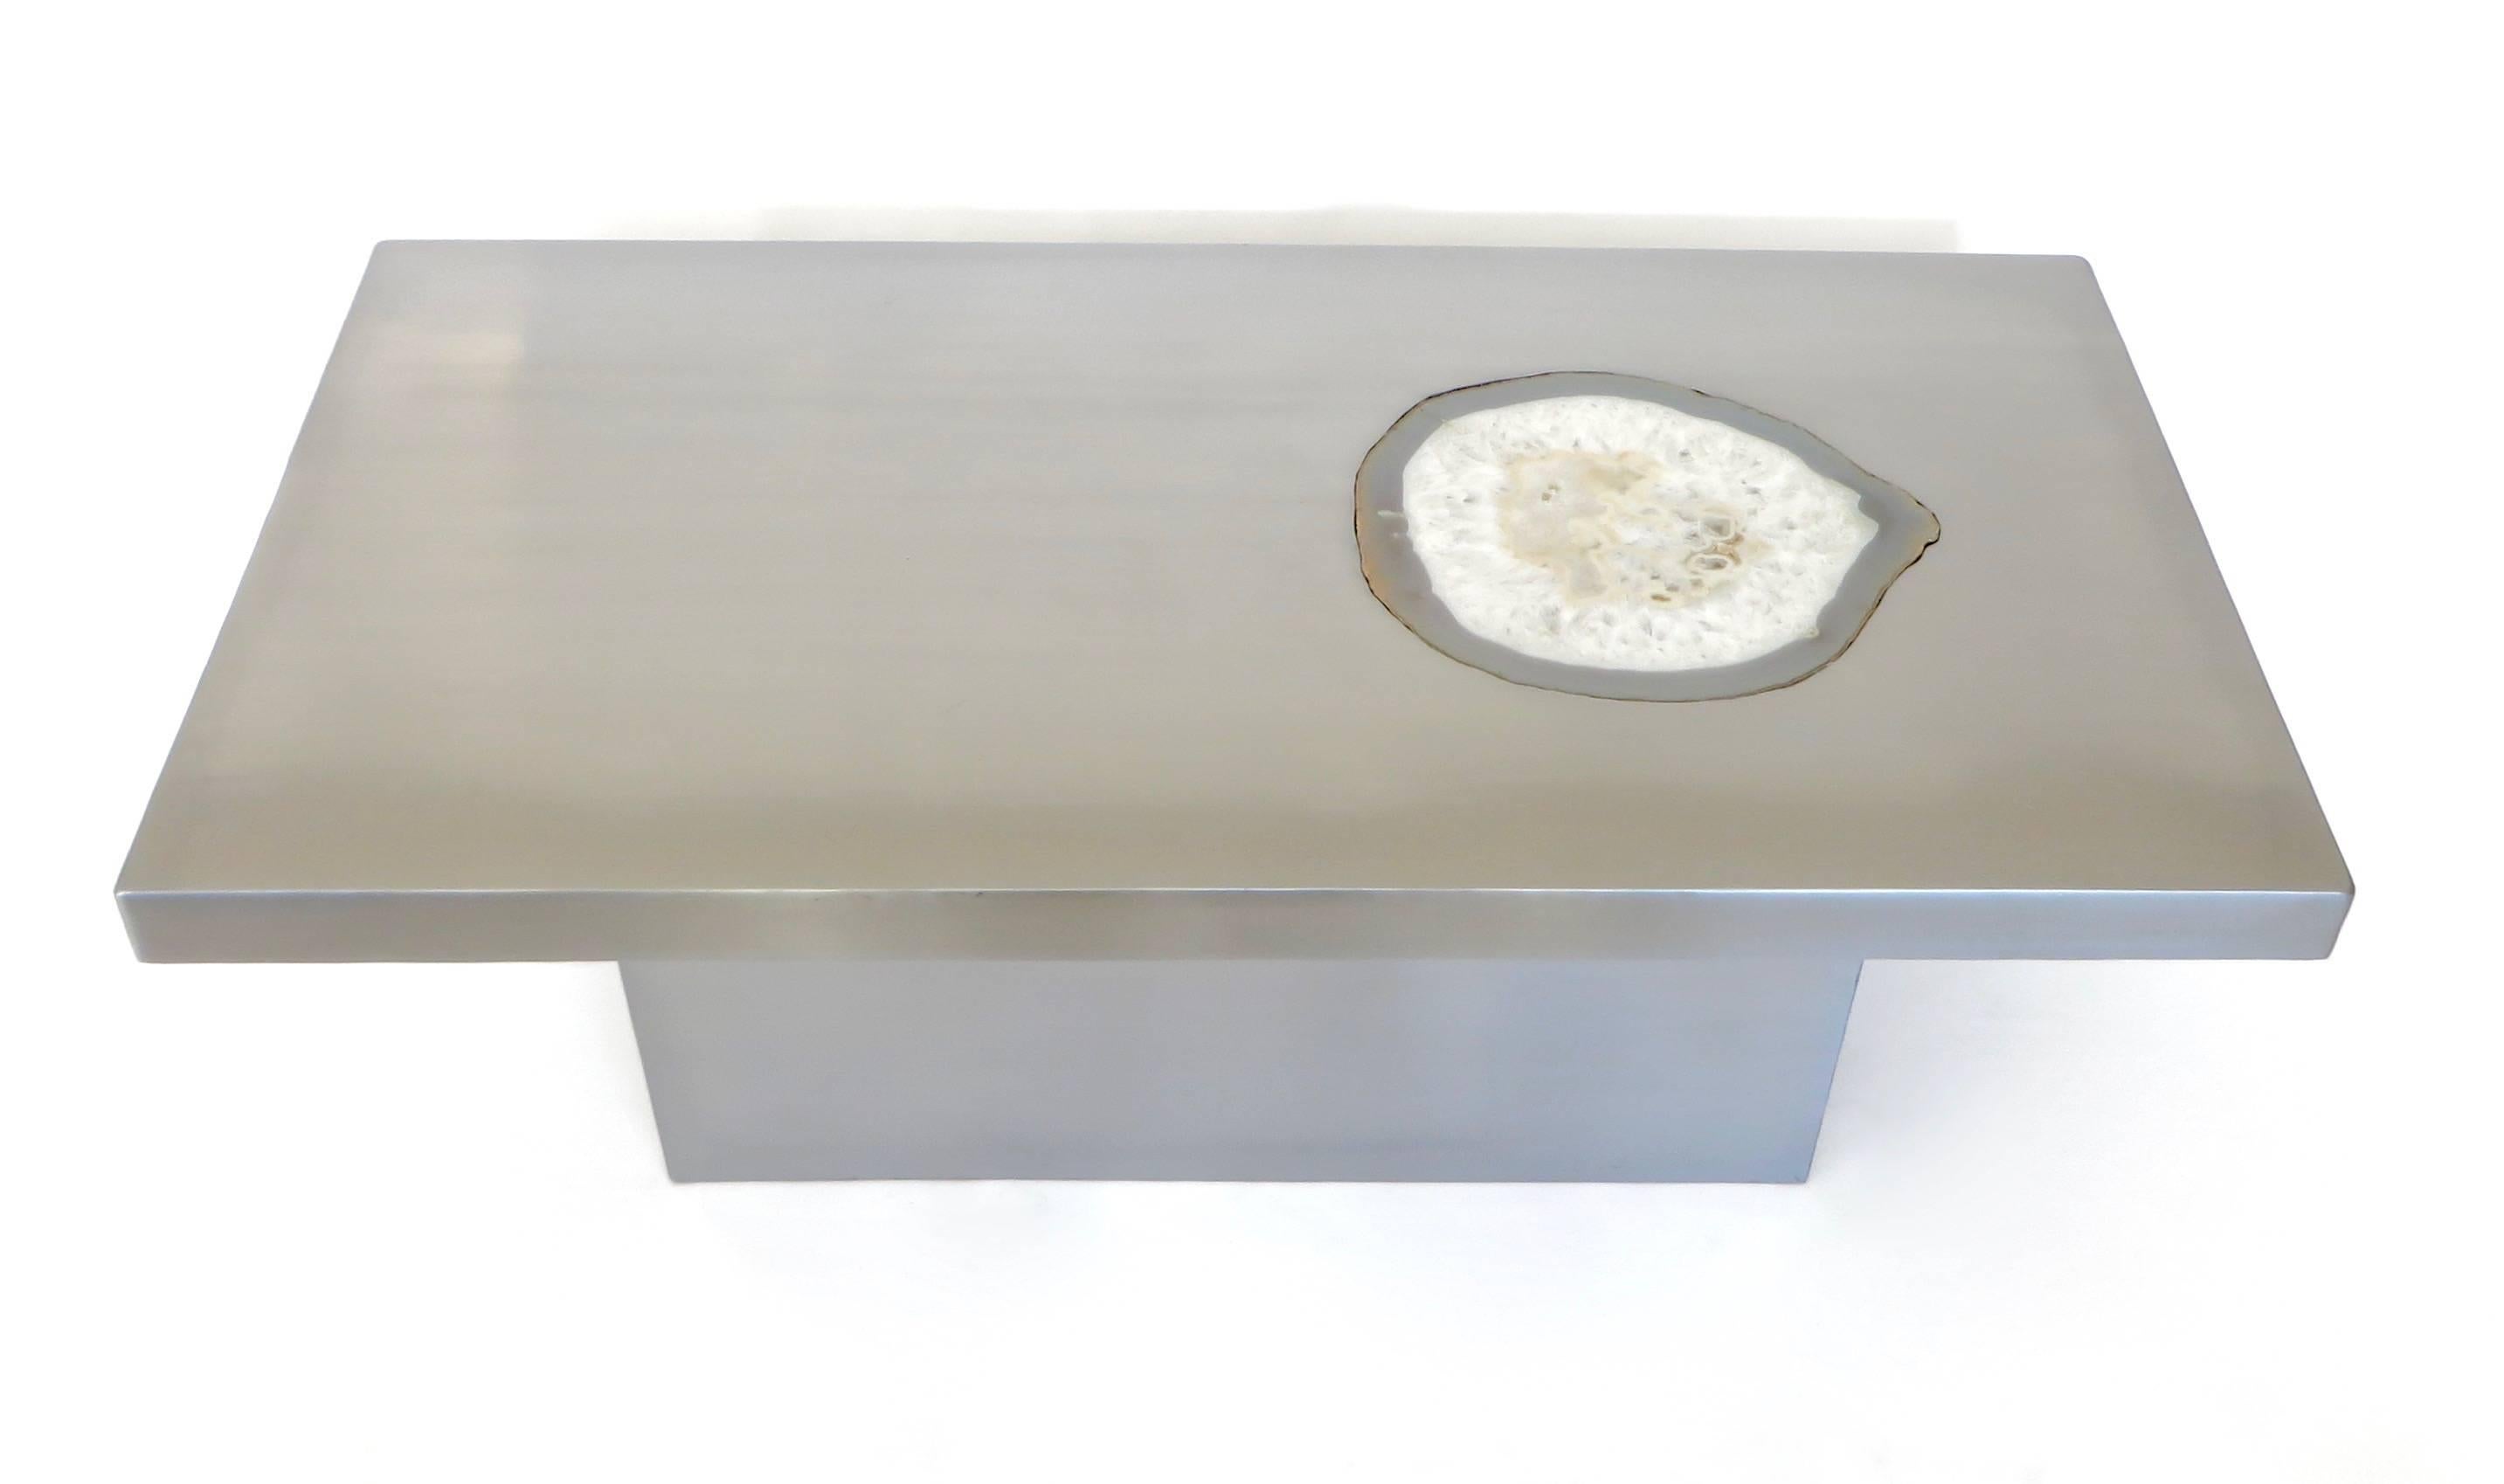 French Stainless Steel Inlaid Agate Coffee Table with Illumination from below 1